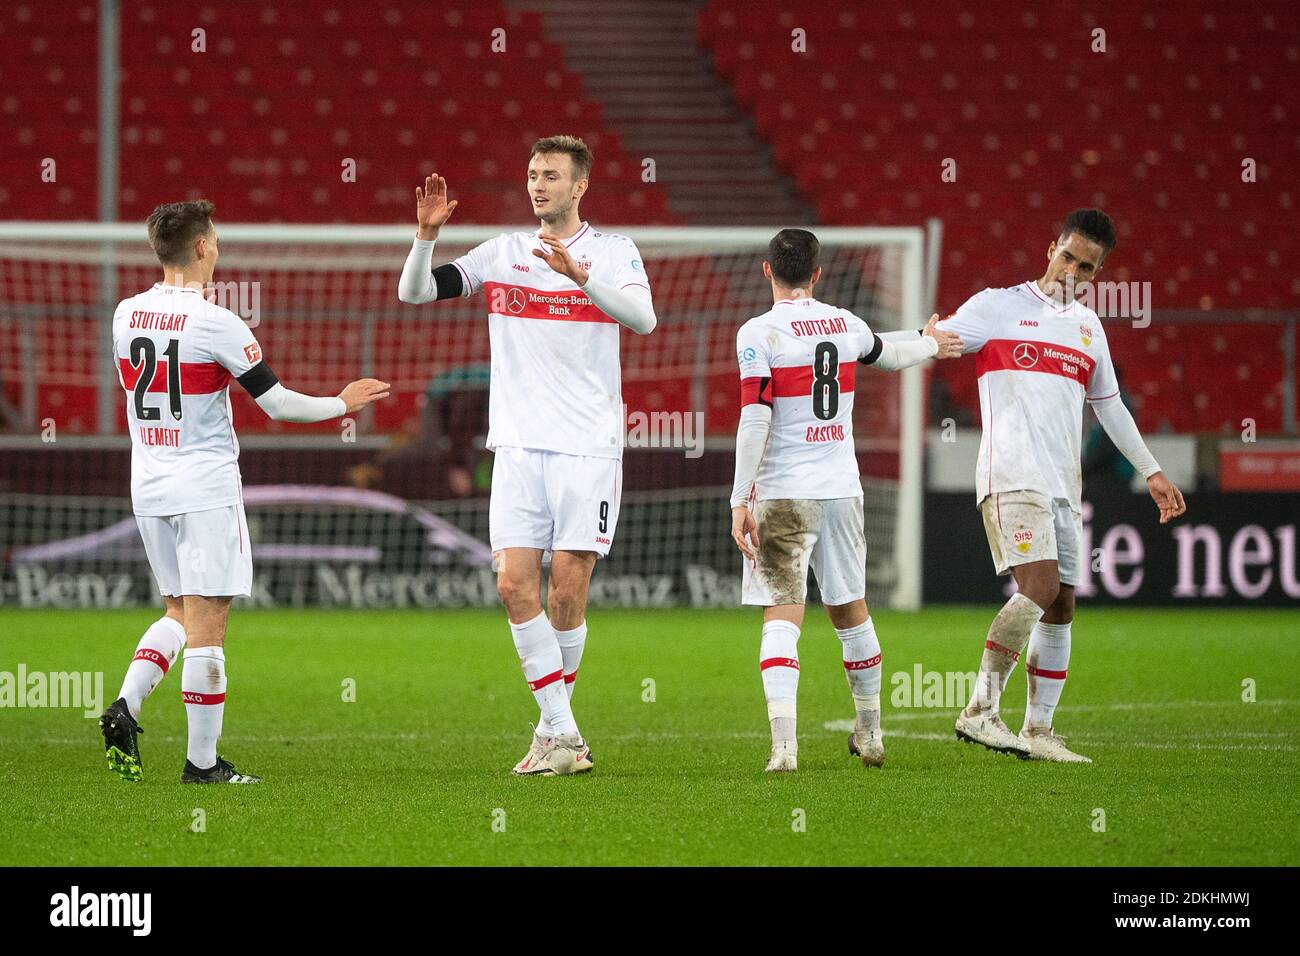 Stuttgart, Germany. 15th Dec, 2020. Football: Bundesliga, VfB Stuttgart - 1. FC Union Berlin, Matchday 12, Mercedes-Benz Arena. Stuttgart's Philipp Klement (l-r), Sasa Kalajdzic, Gonzalo Castro and Daniel Didavi rejoice after the match. Credit: Sebastian Gollnow/dpa - IMPORTANT NOTE: In accordance with the regulations of the DFL Deutsche Fußball Liga and/or the DFB Deutscher Fußball-Bund, it is prohibited to use or have used photographs taken in the stadium and/or of the match in the form of sequence pictures and/or video-like photo series./dpa/Alamy Live News Stock Photo